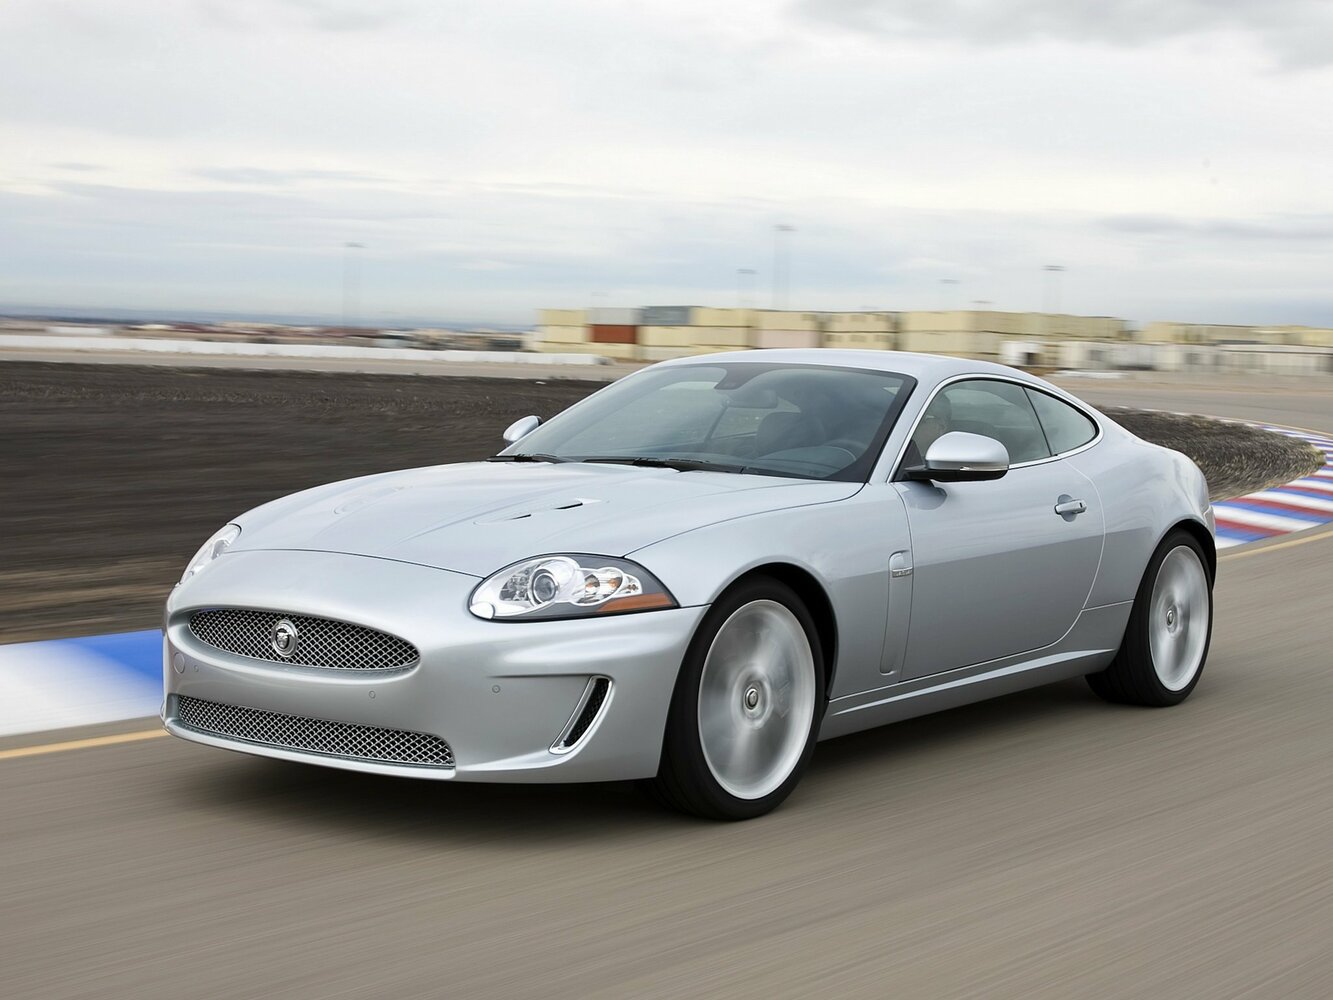 XKR